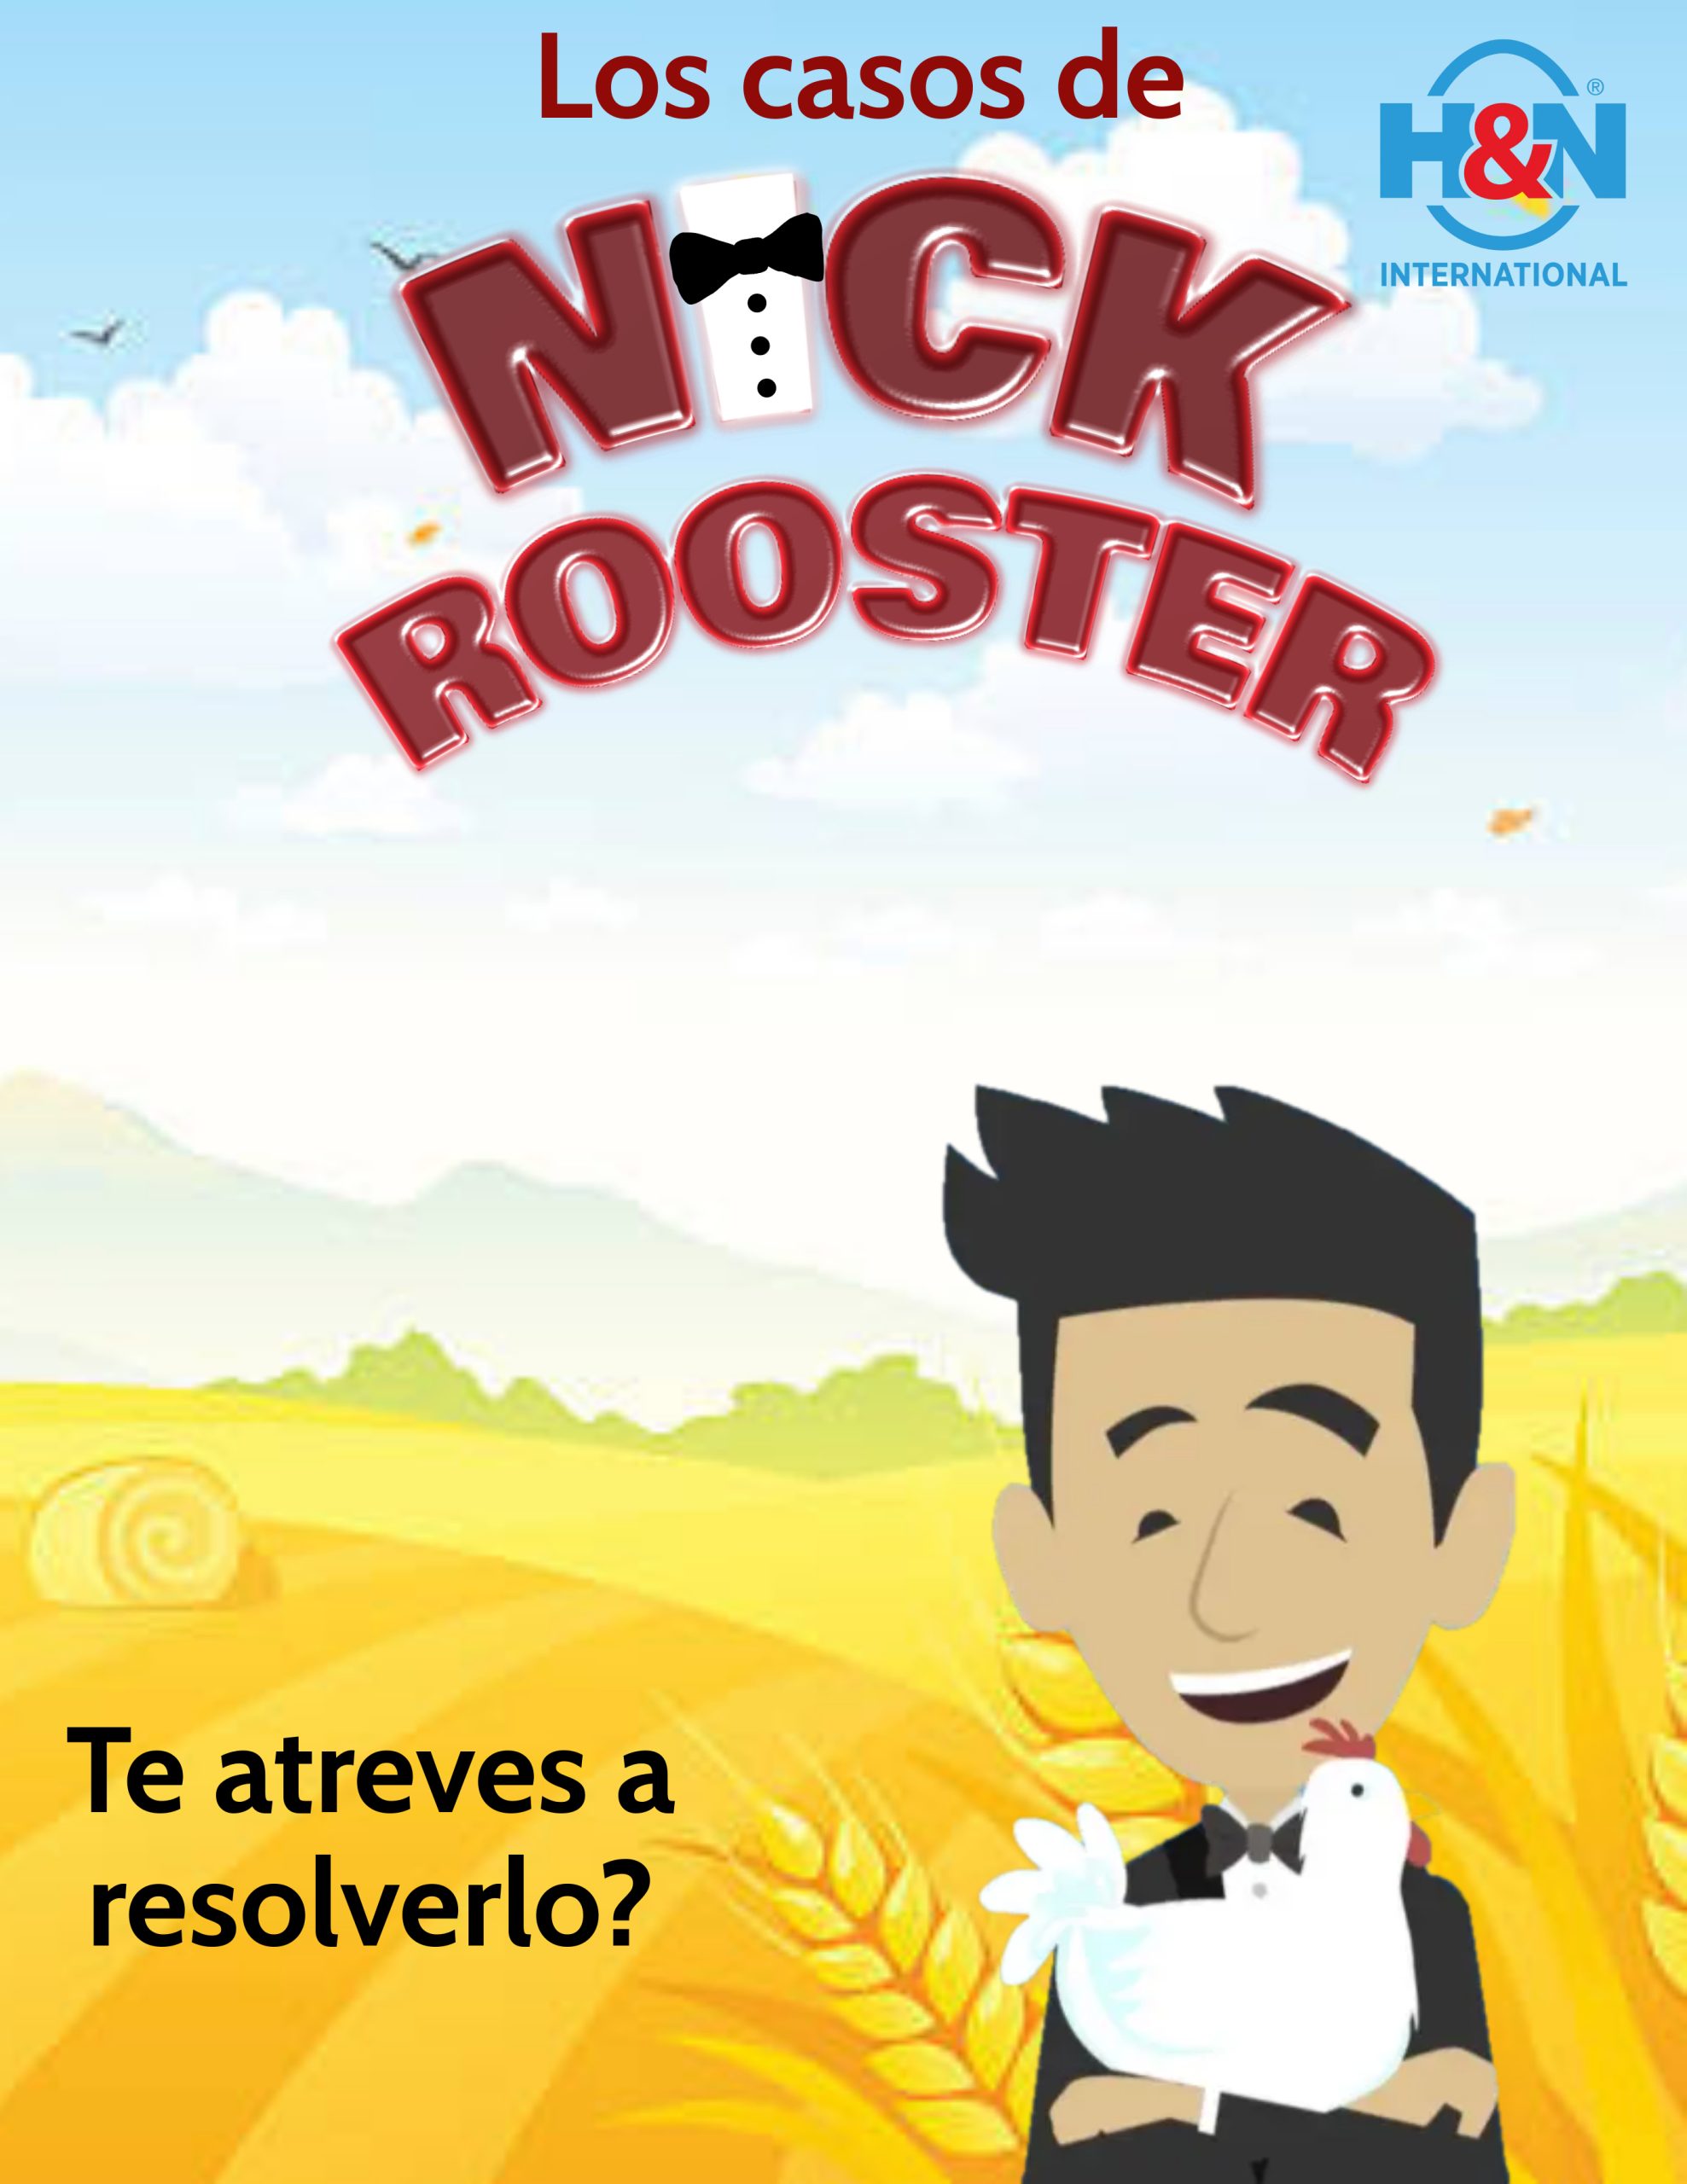 Nick Rooster caso num. 17